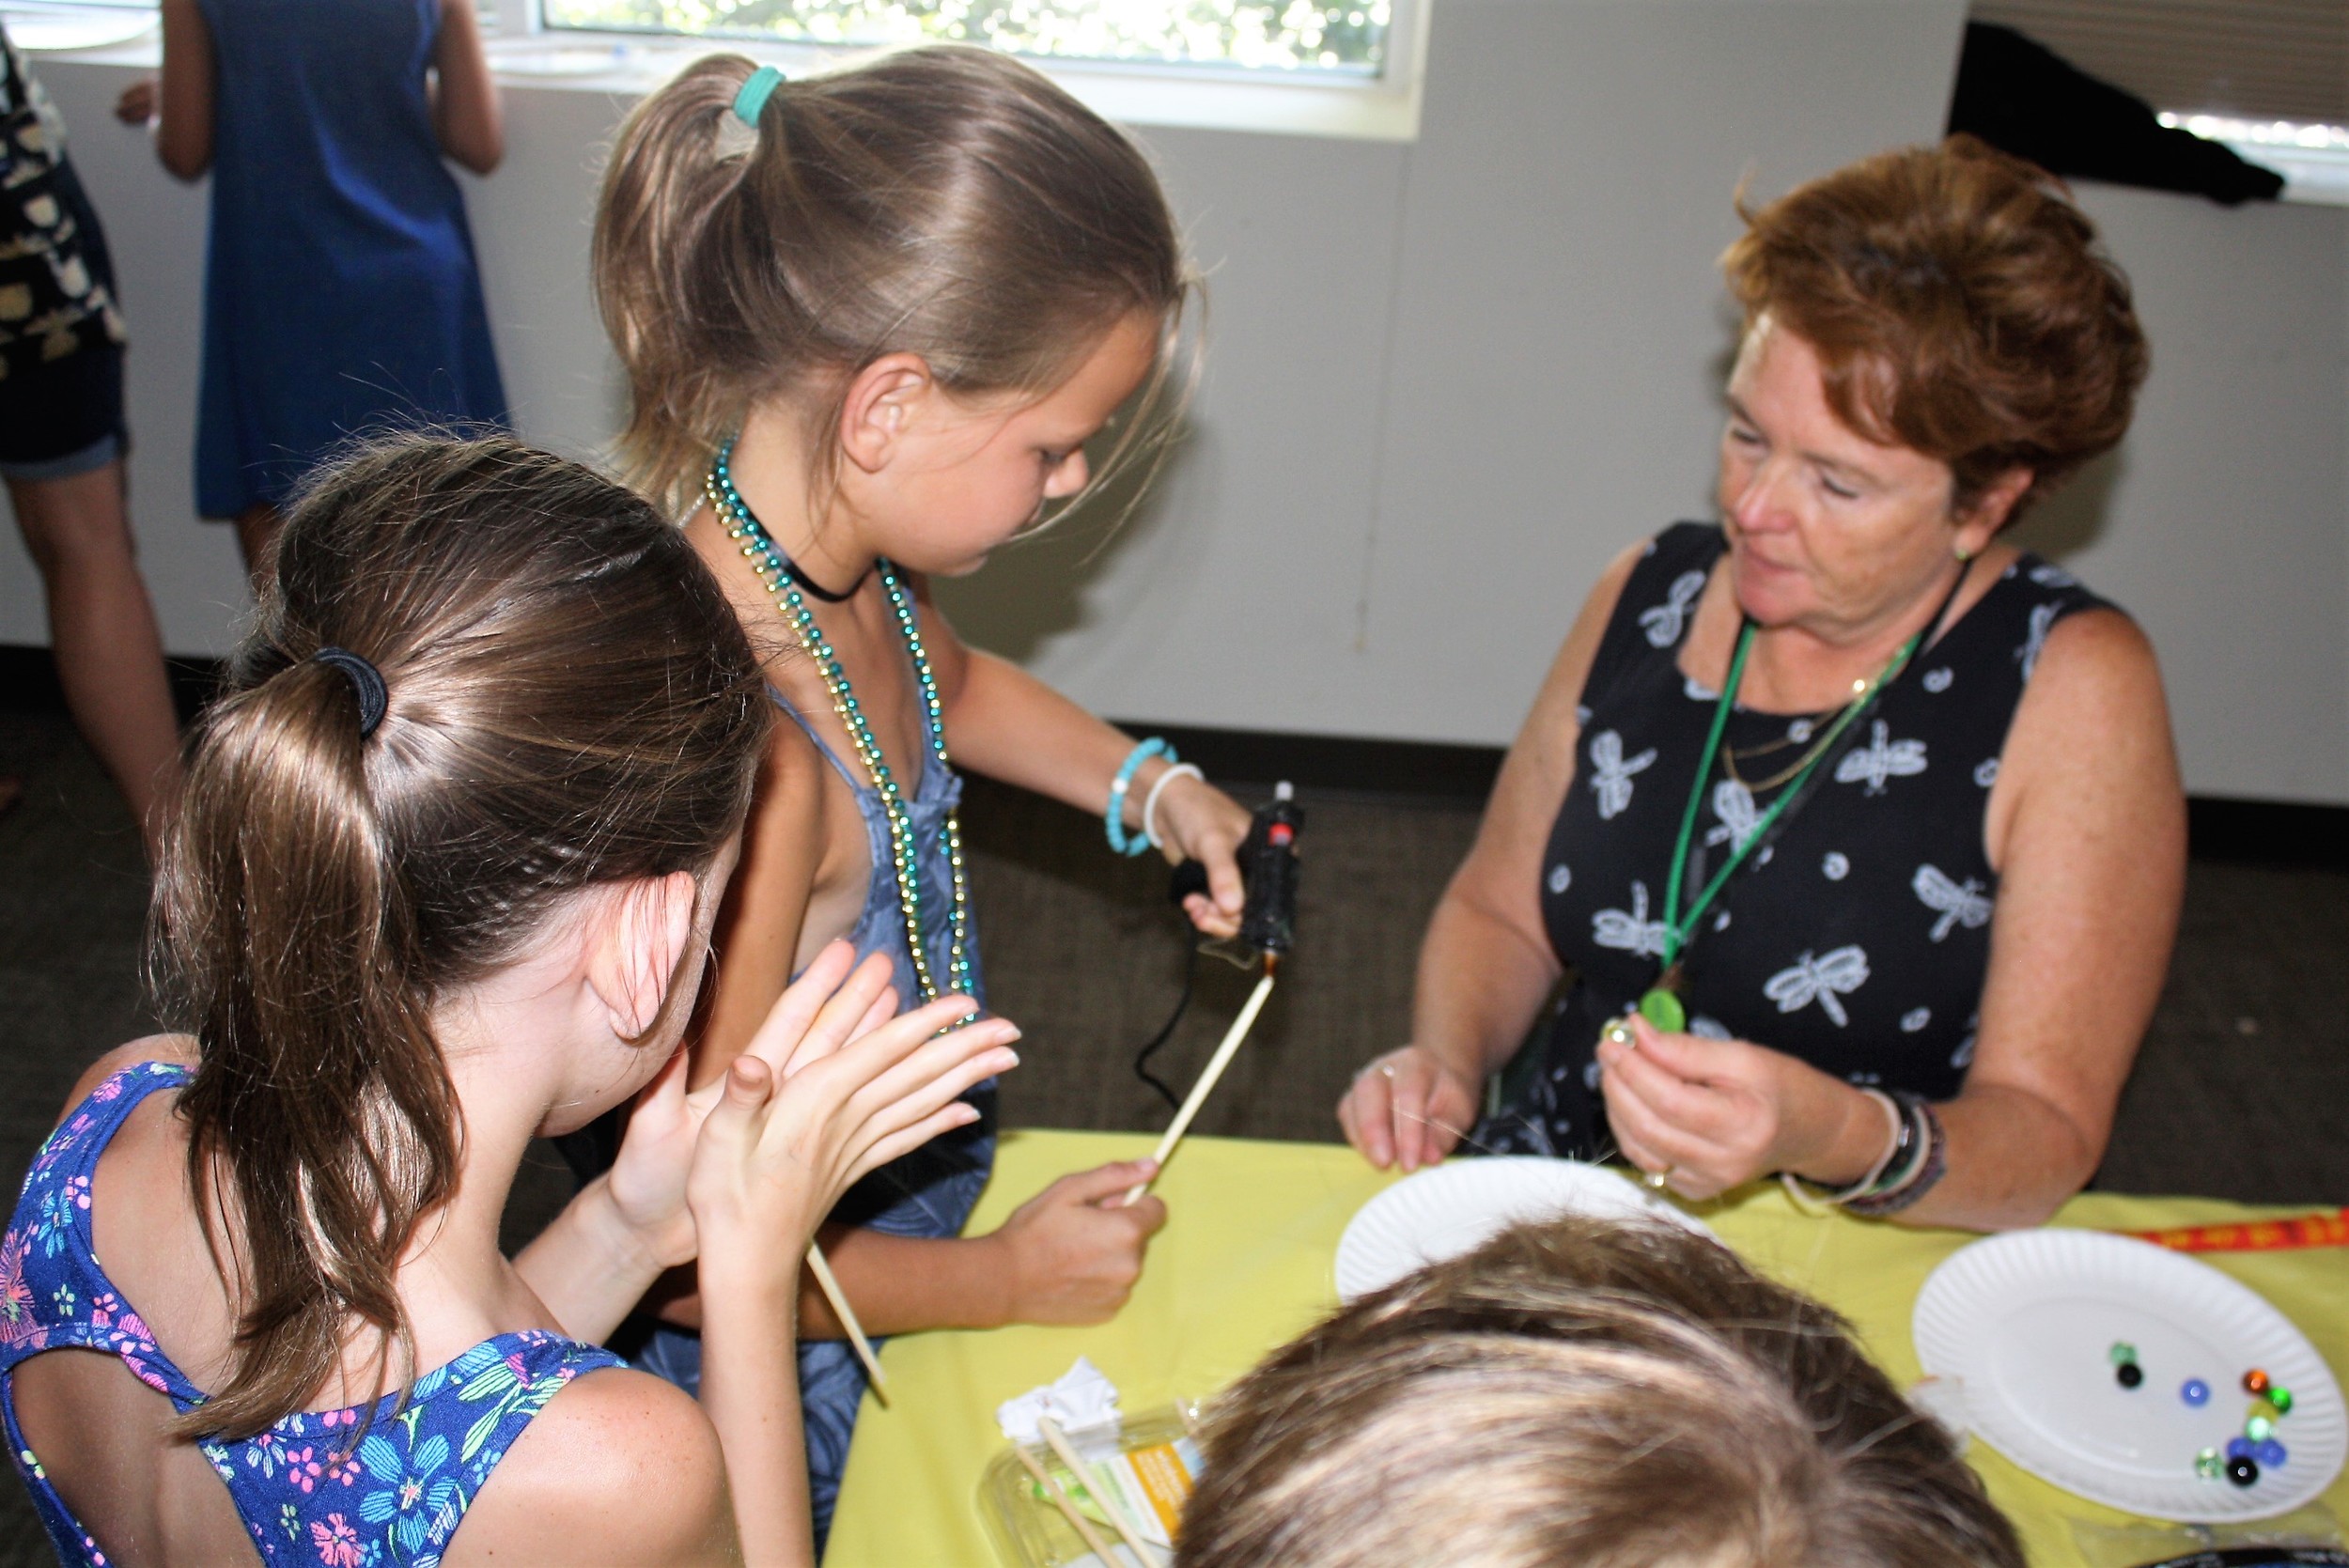 Youth Services Assistant Suzanne Egeln (right) helps children make magic wands.